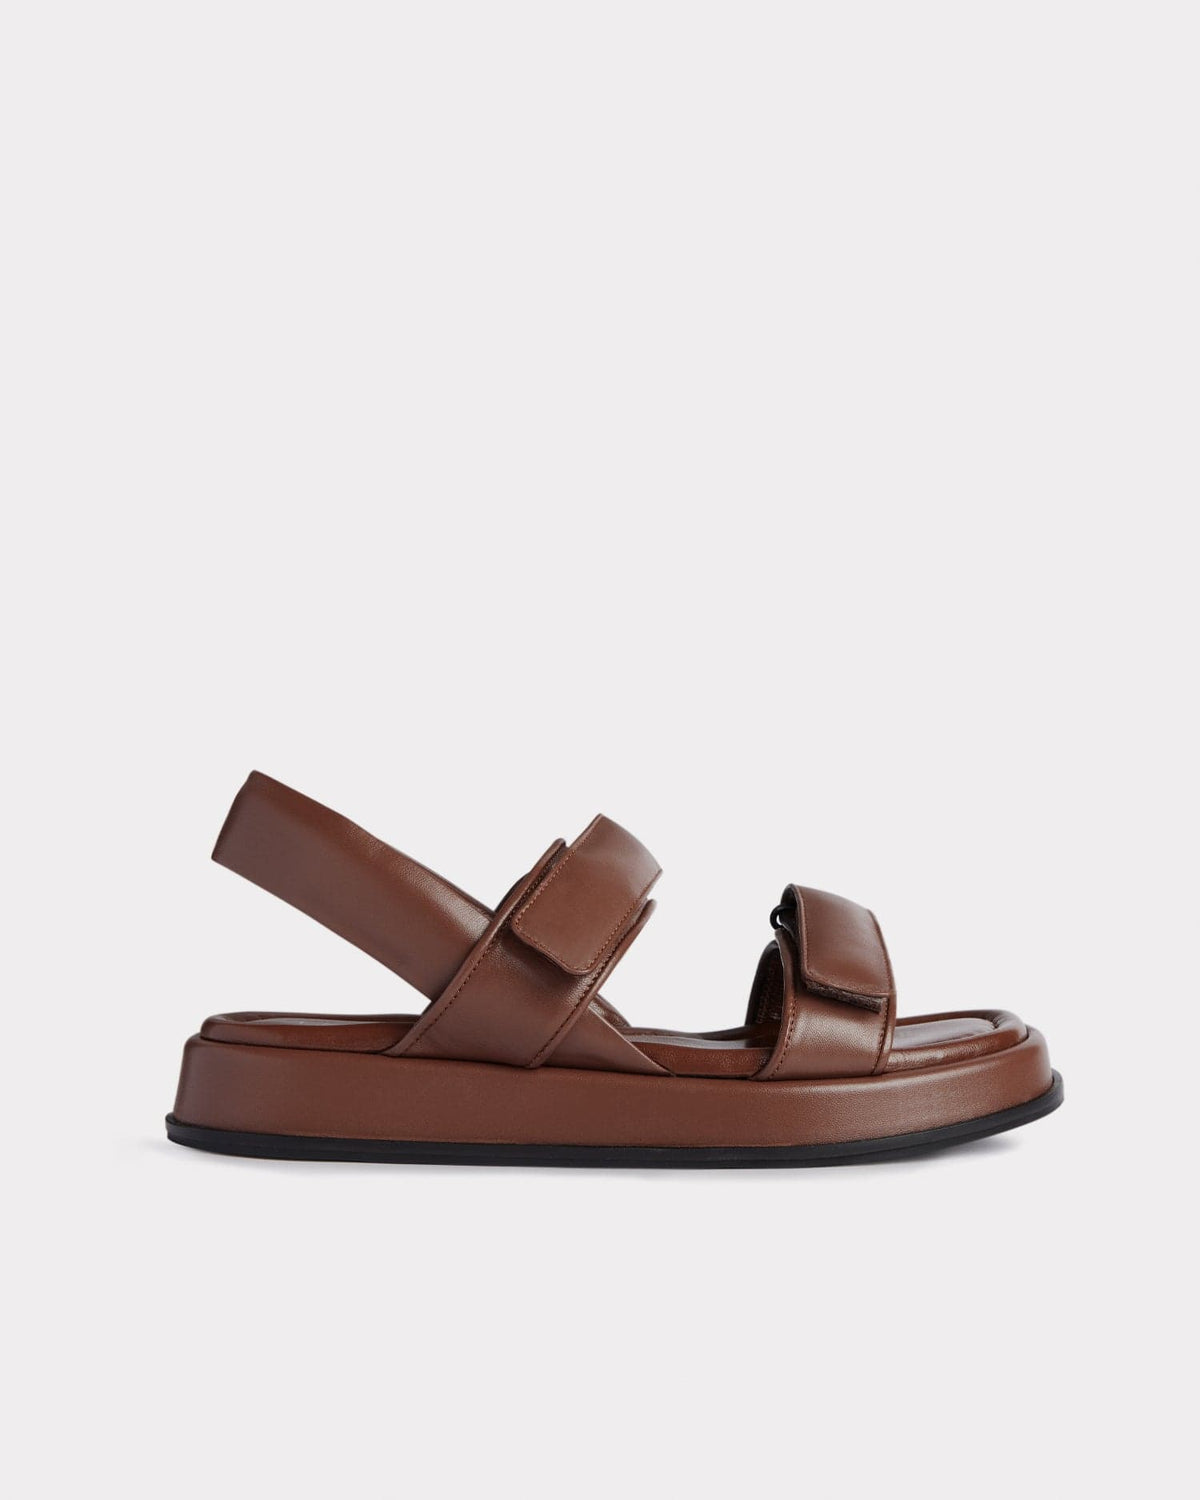 chunky trendy summer sandals in brown leather